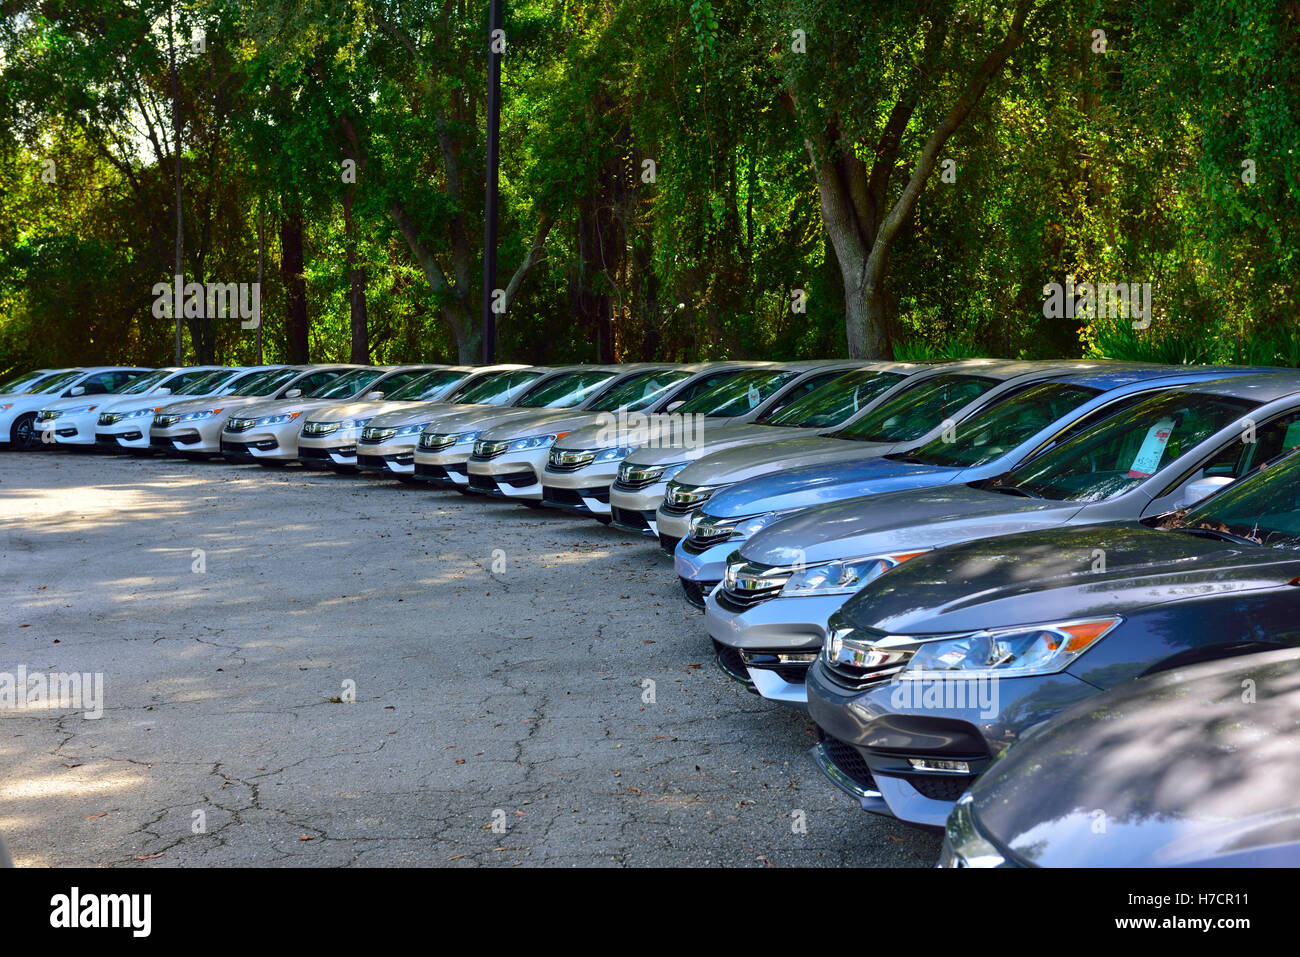 Honda cars all lined up in a row, for sale outside Stock Photo